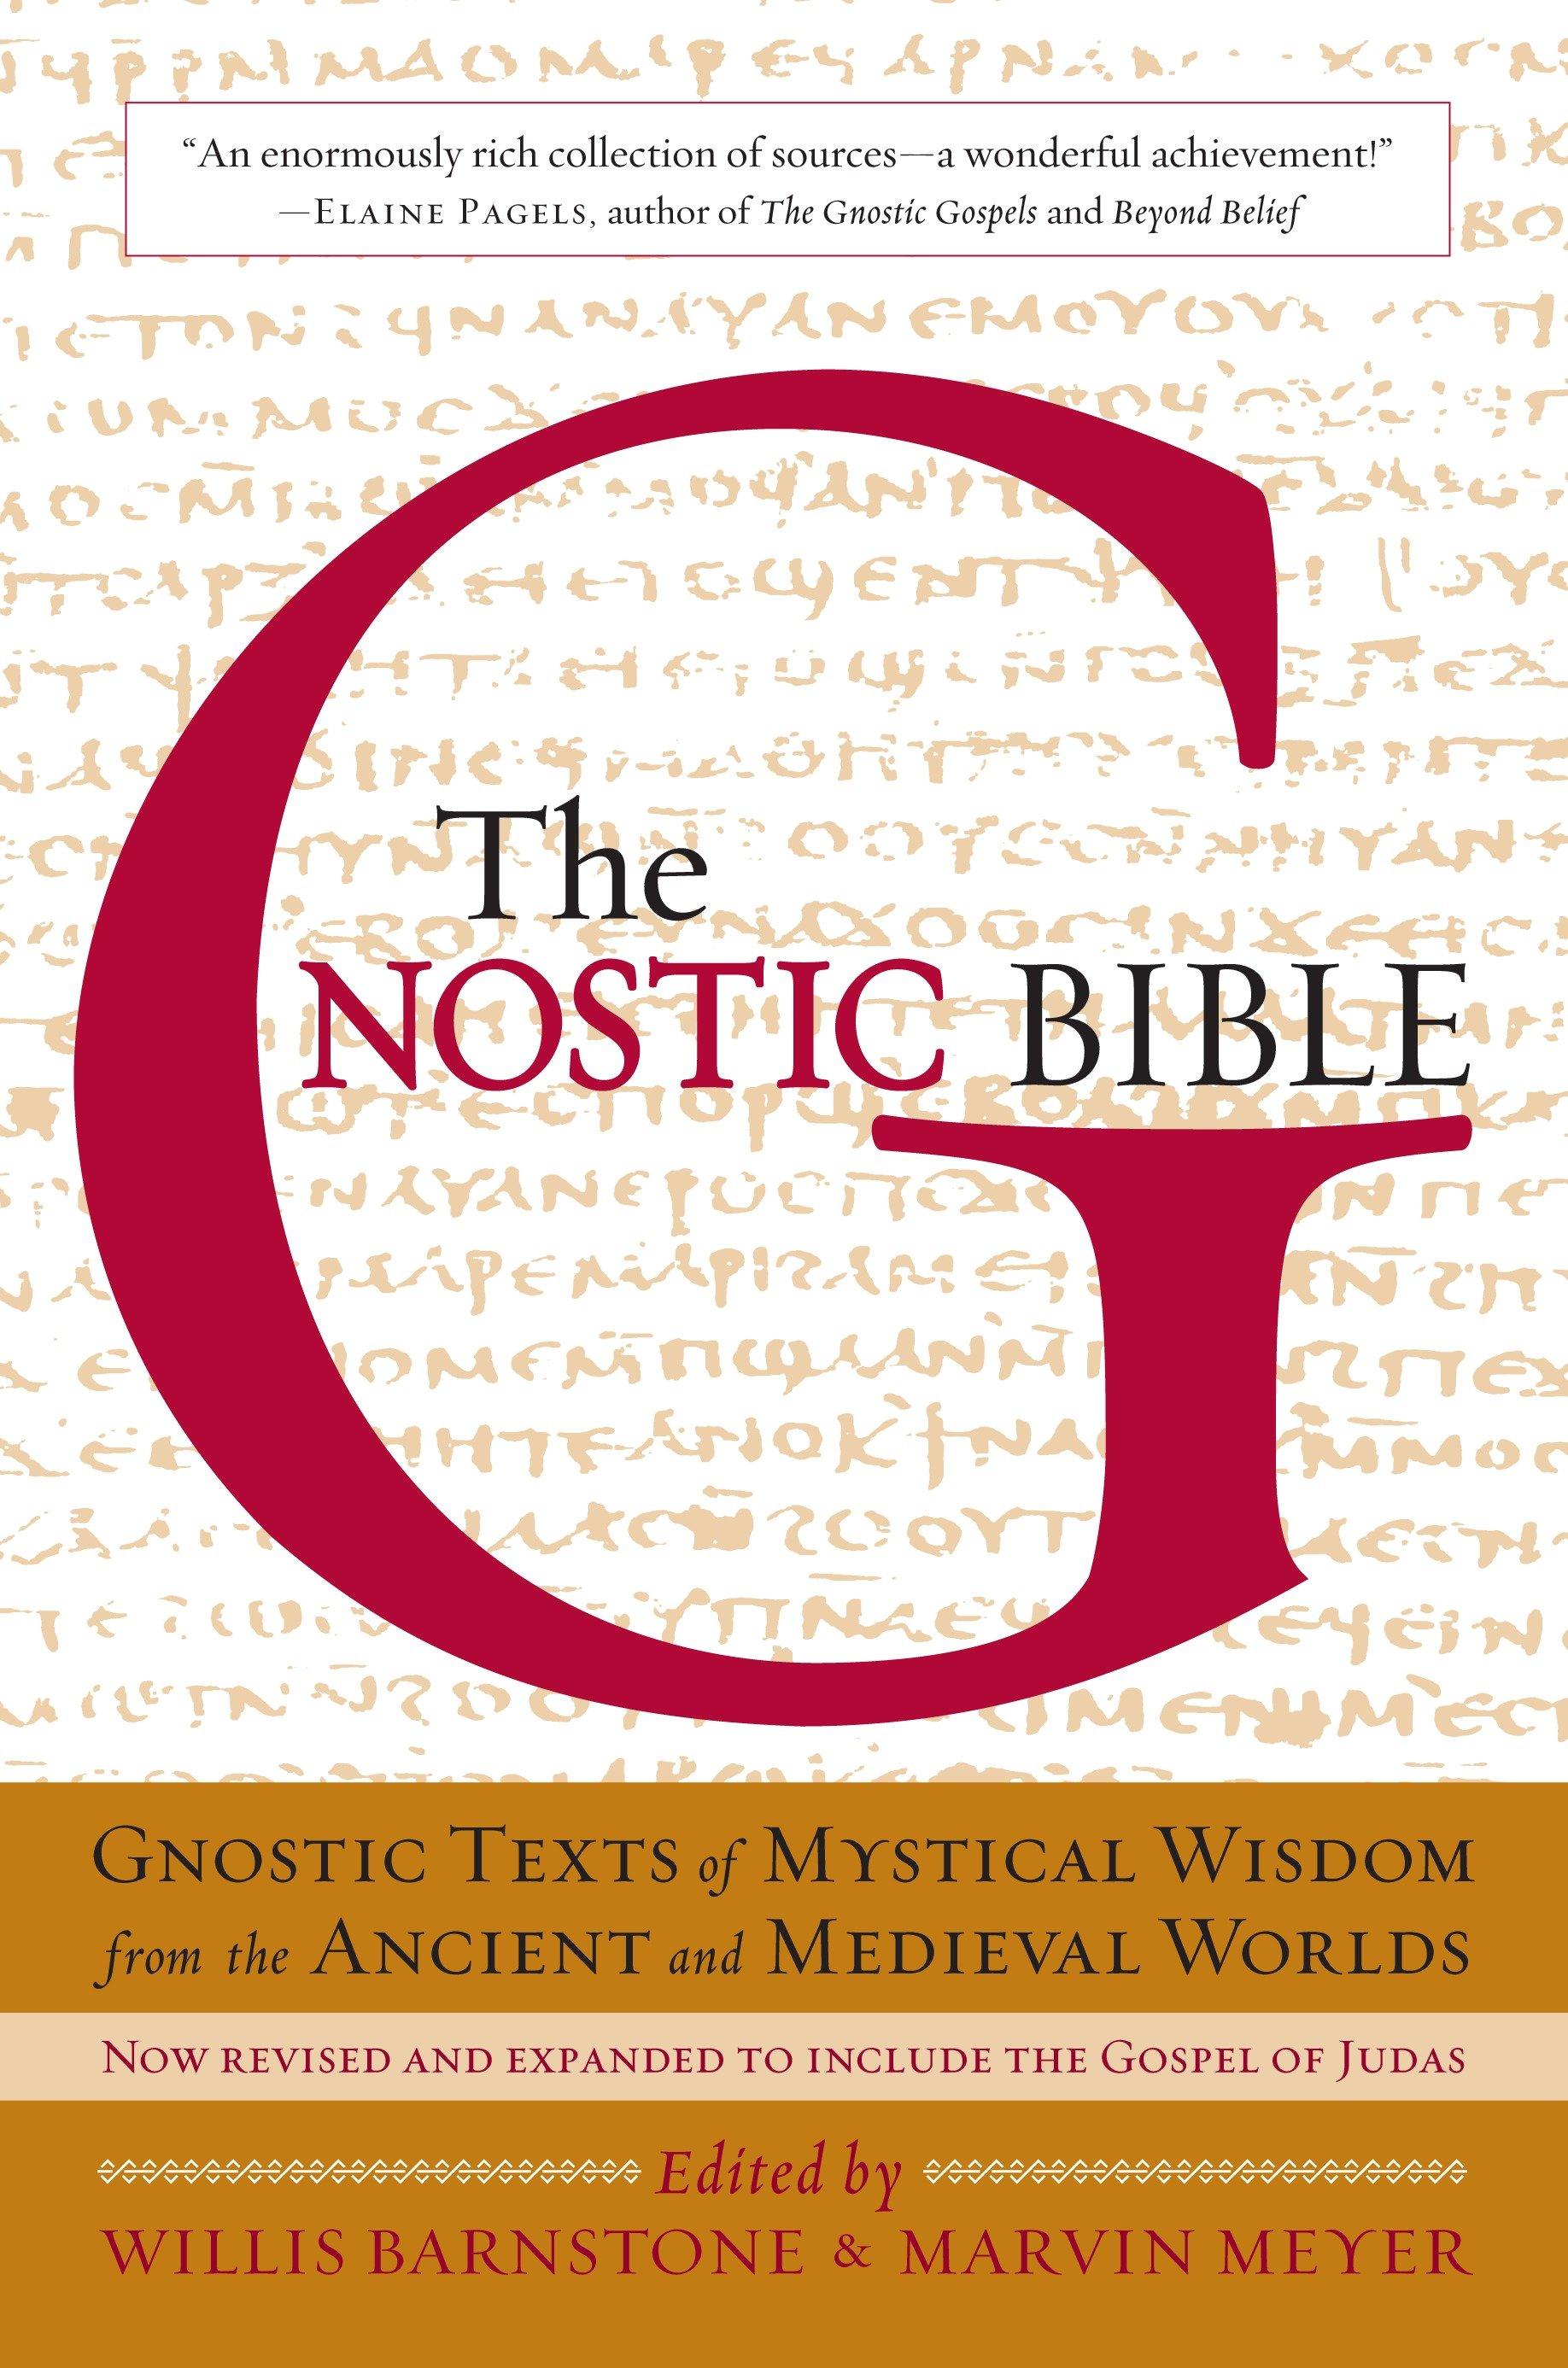 The Gnostic Bible / Revised and Expanded Edition / Marvin Meyer (u. a.) / Taschenbuch / Einband - flex.(Paperback) / Englisch / 2009 / Shambhala Publications Inc / EAN 9781590306314 - Meyer, Marvin